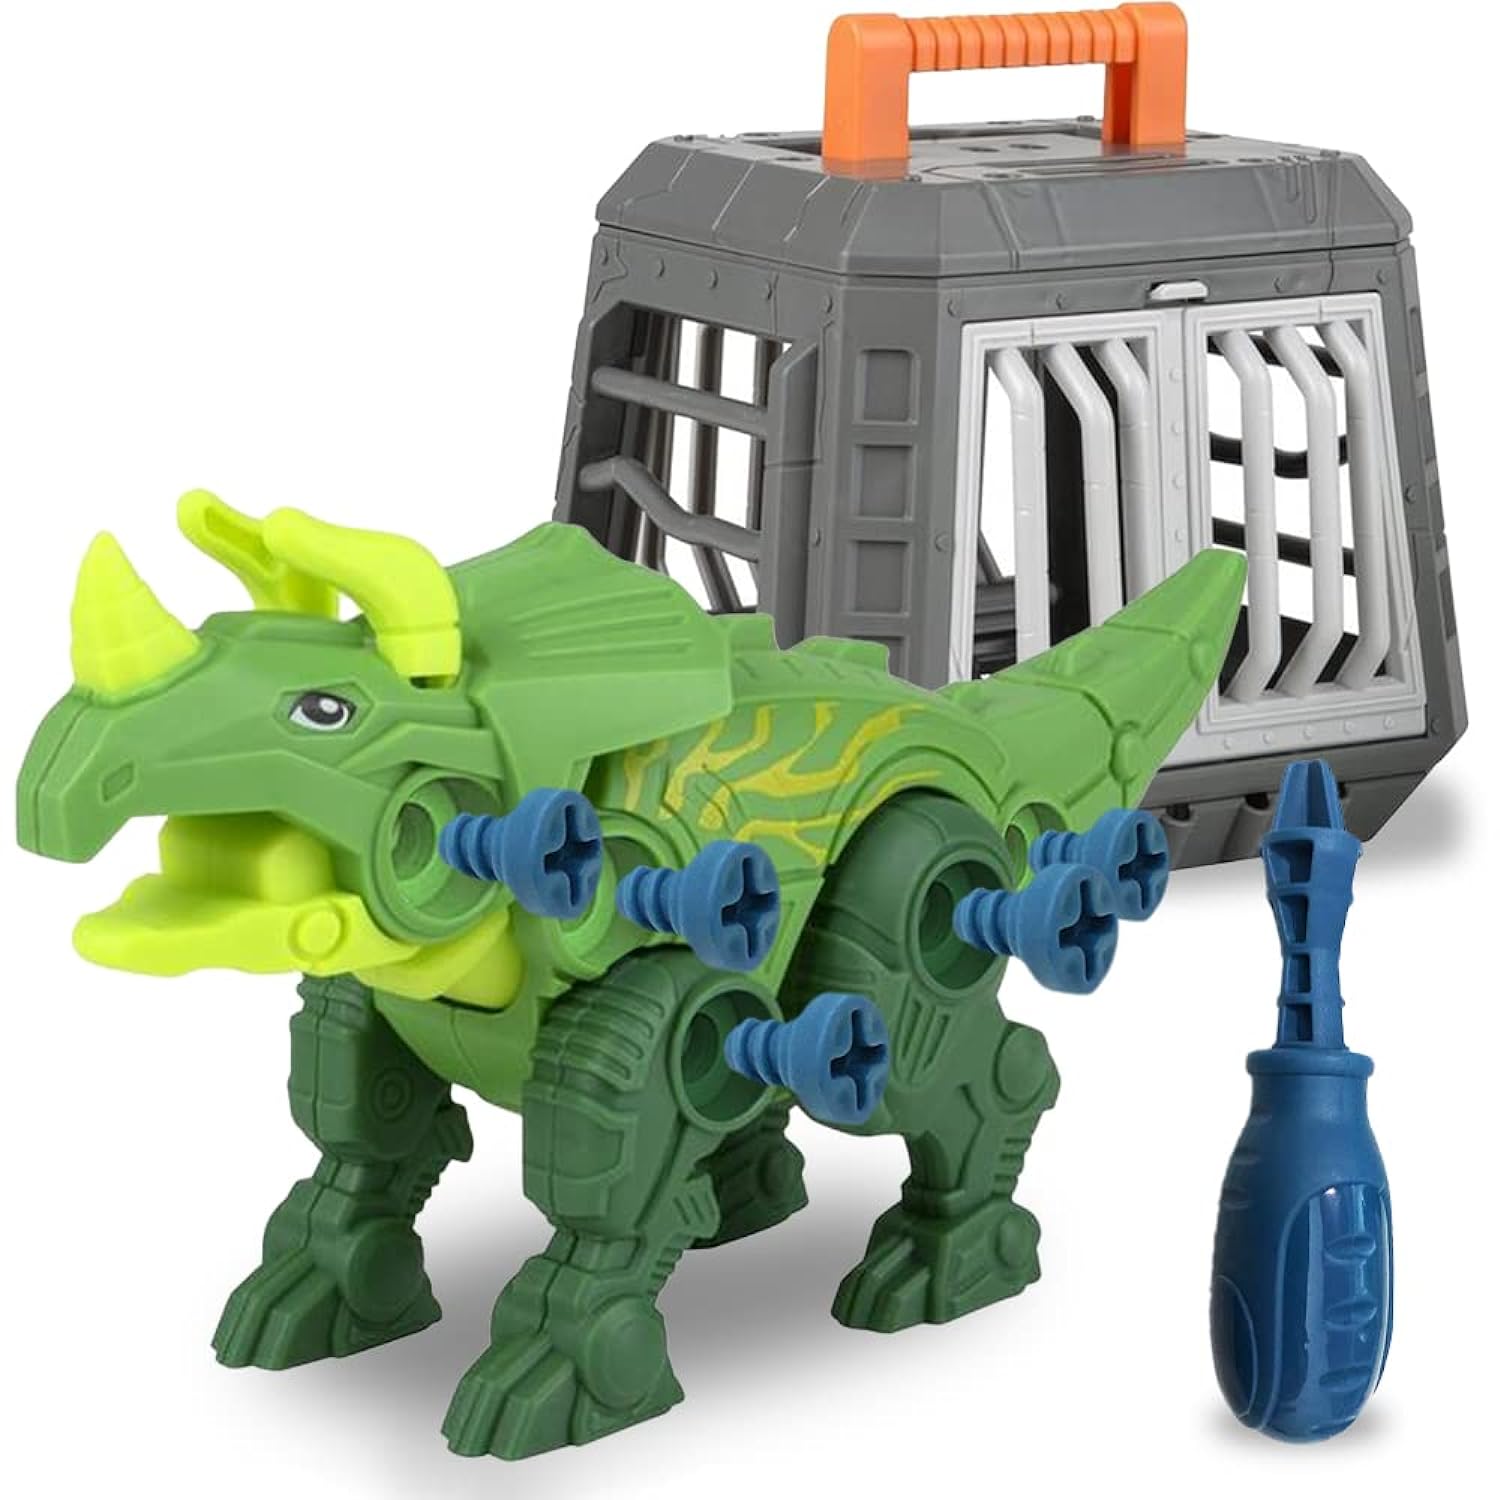 Great Choice Products Take Apart Triceratops Dinosaur Toy Kit, Assemblesaurus Dinosaur Toy With Cage & Screwdriver, Dinosaur Take Apart Toys For